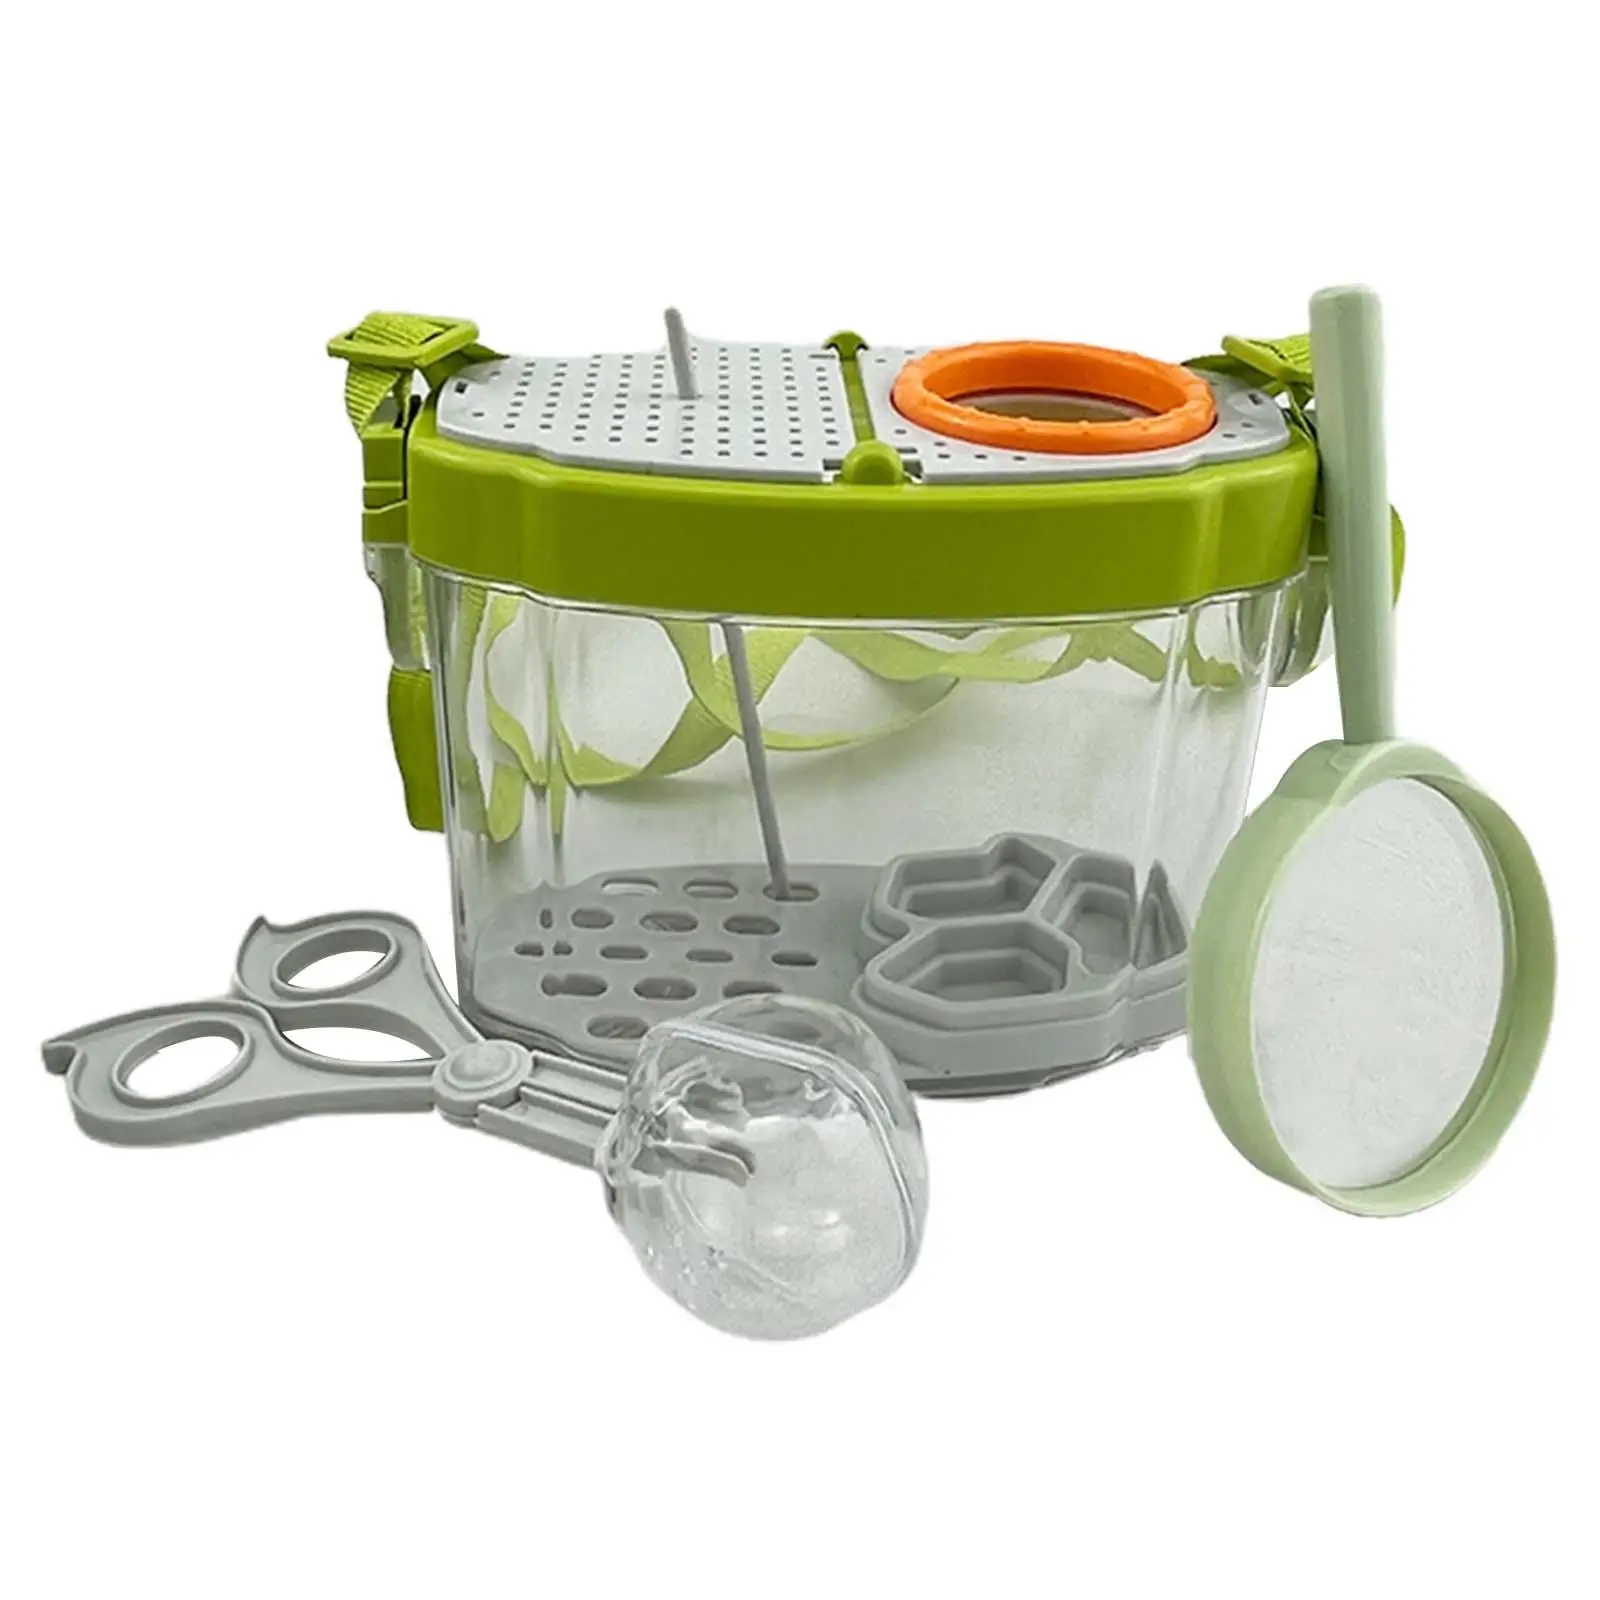 Bug Catcher Portable Magnifying Glass Container for Boys Girls Kids Children